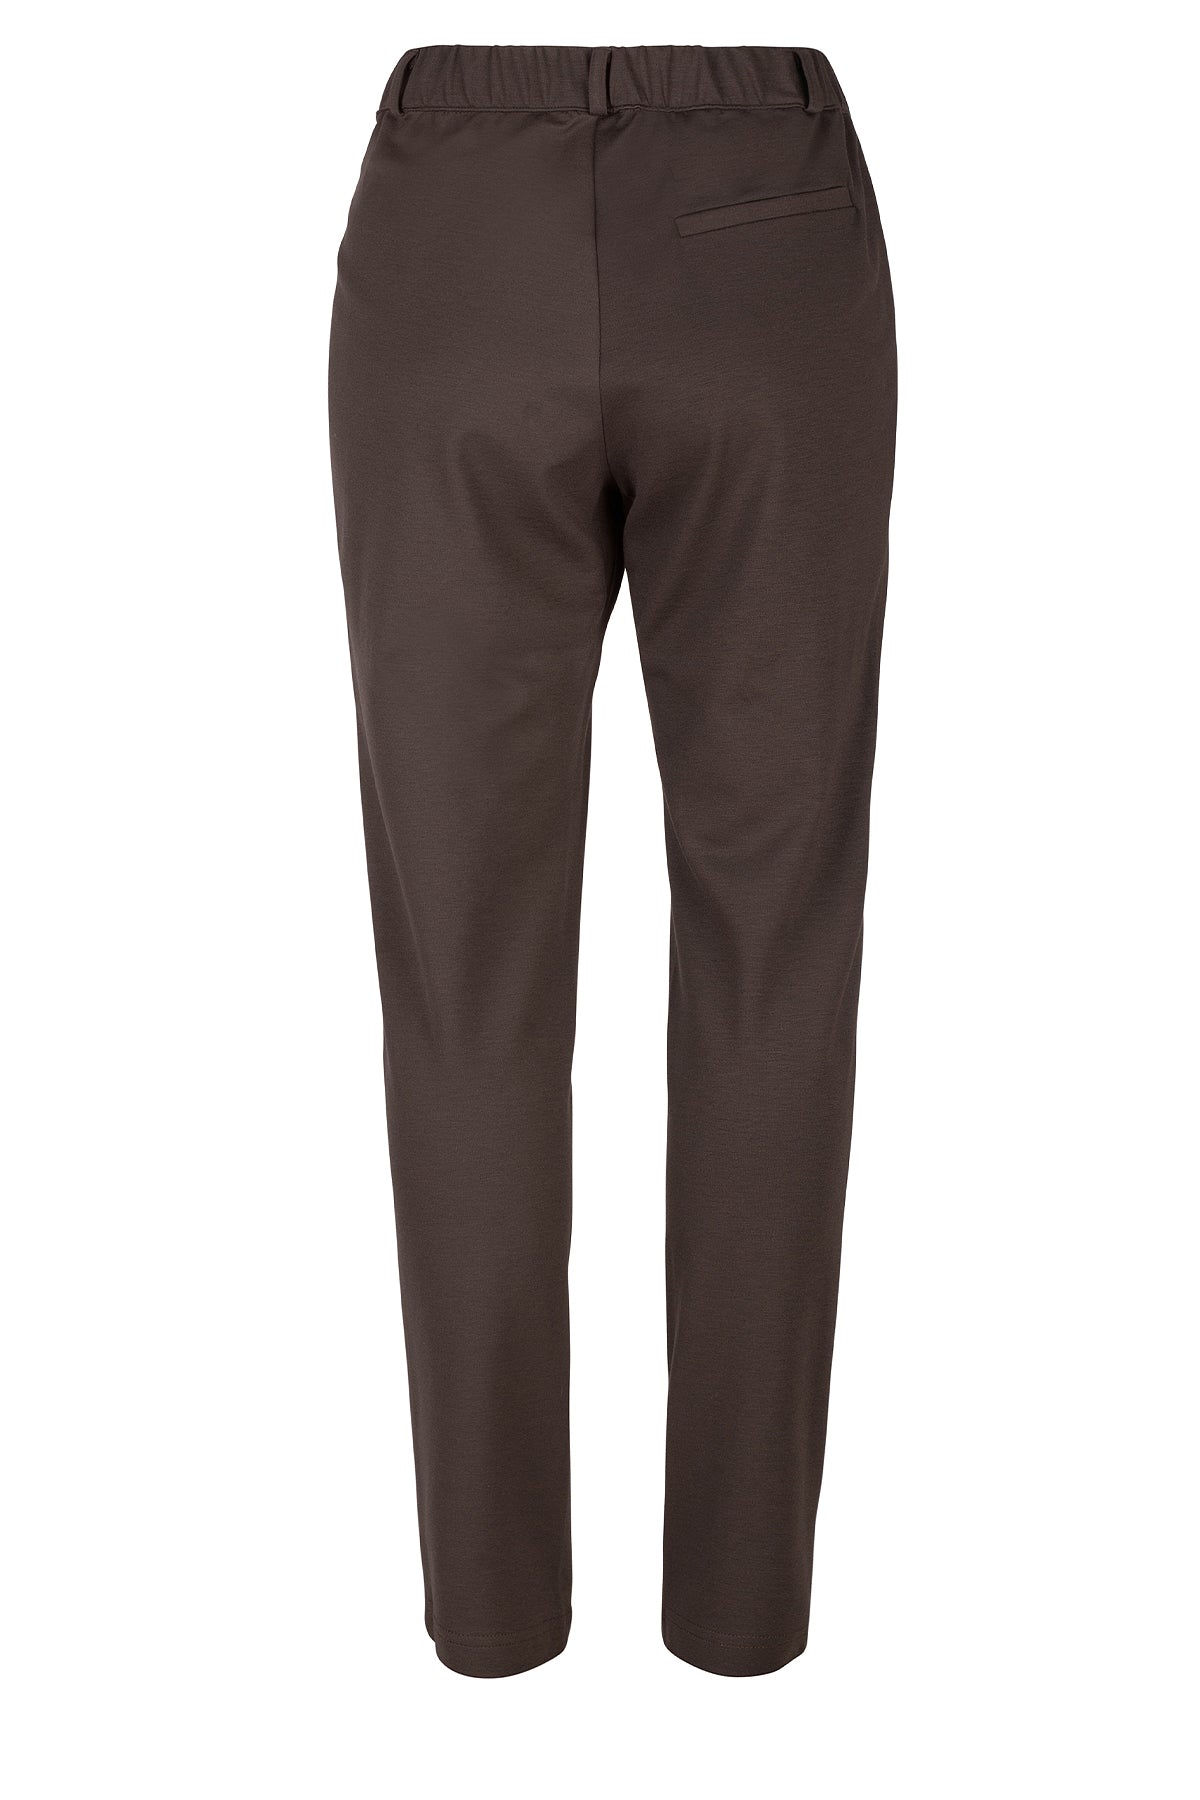 LUXZUZ // ONE TWO Rise Pant Pant 799 Choco Lux